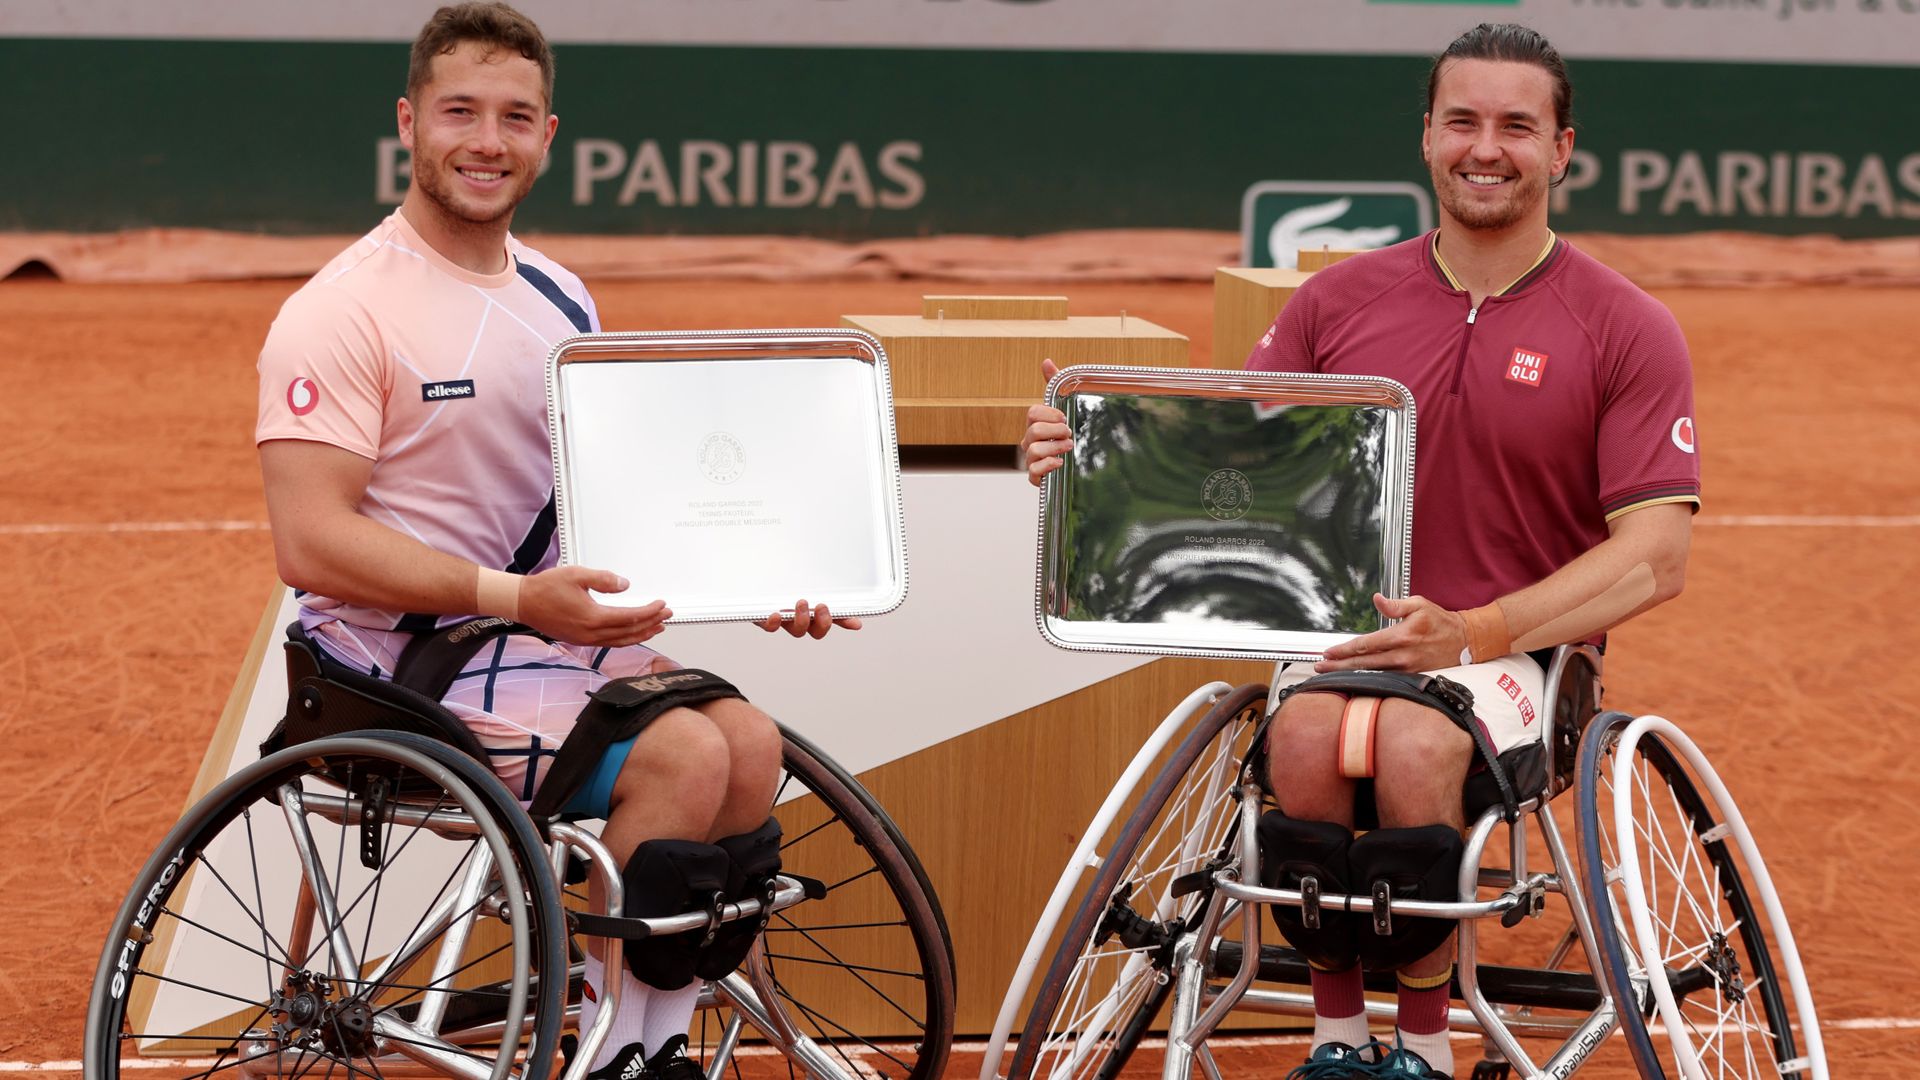 Hewett & Reid claim 10th consecutive Grand Slam title at French Open